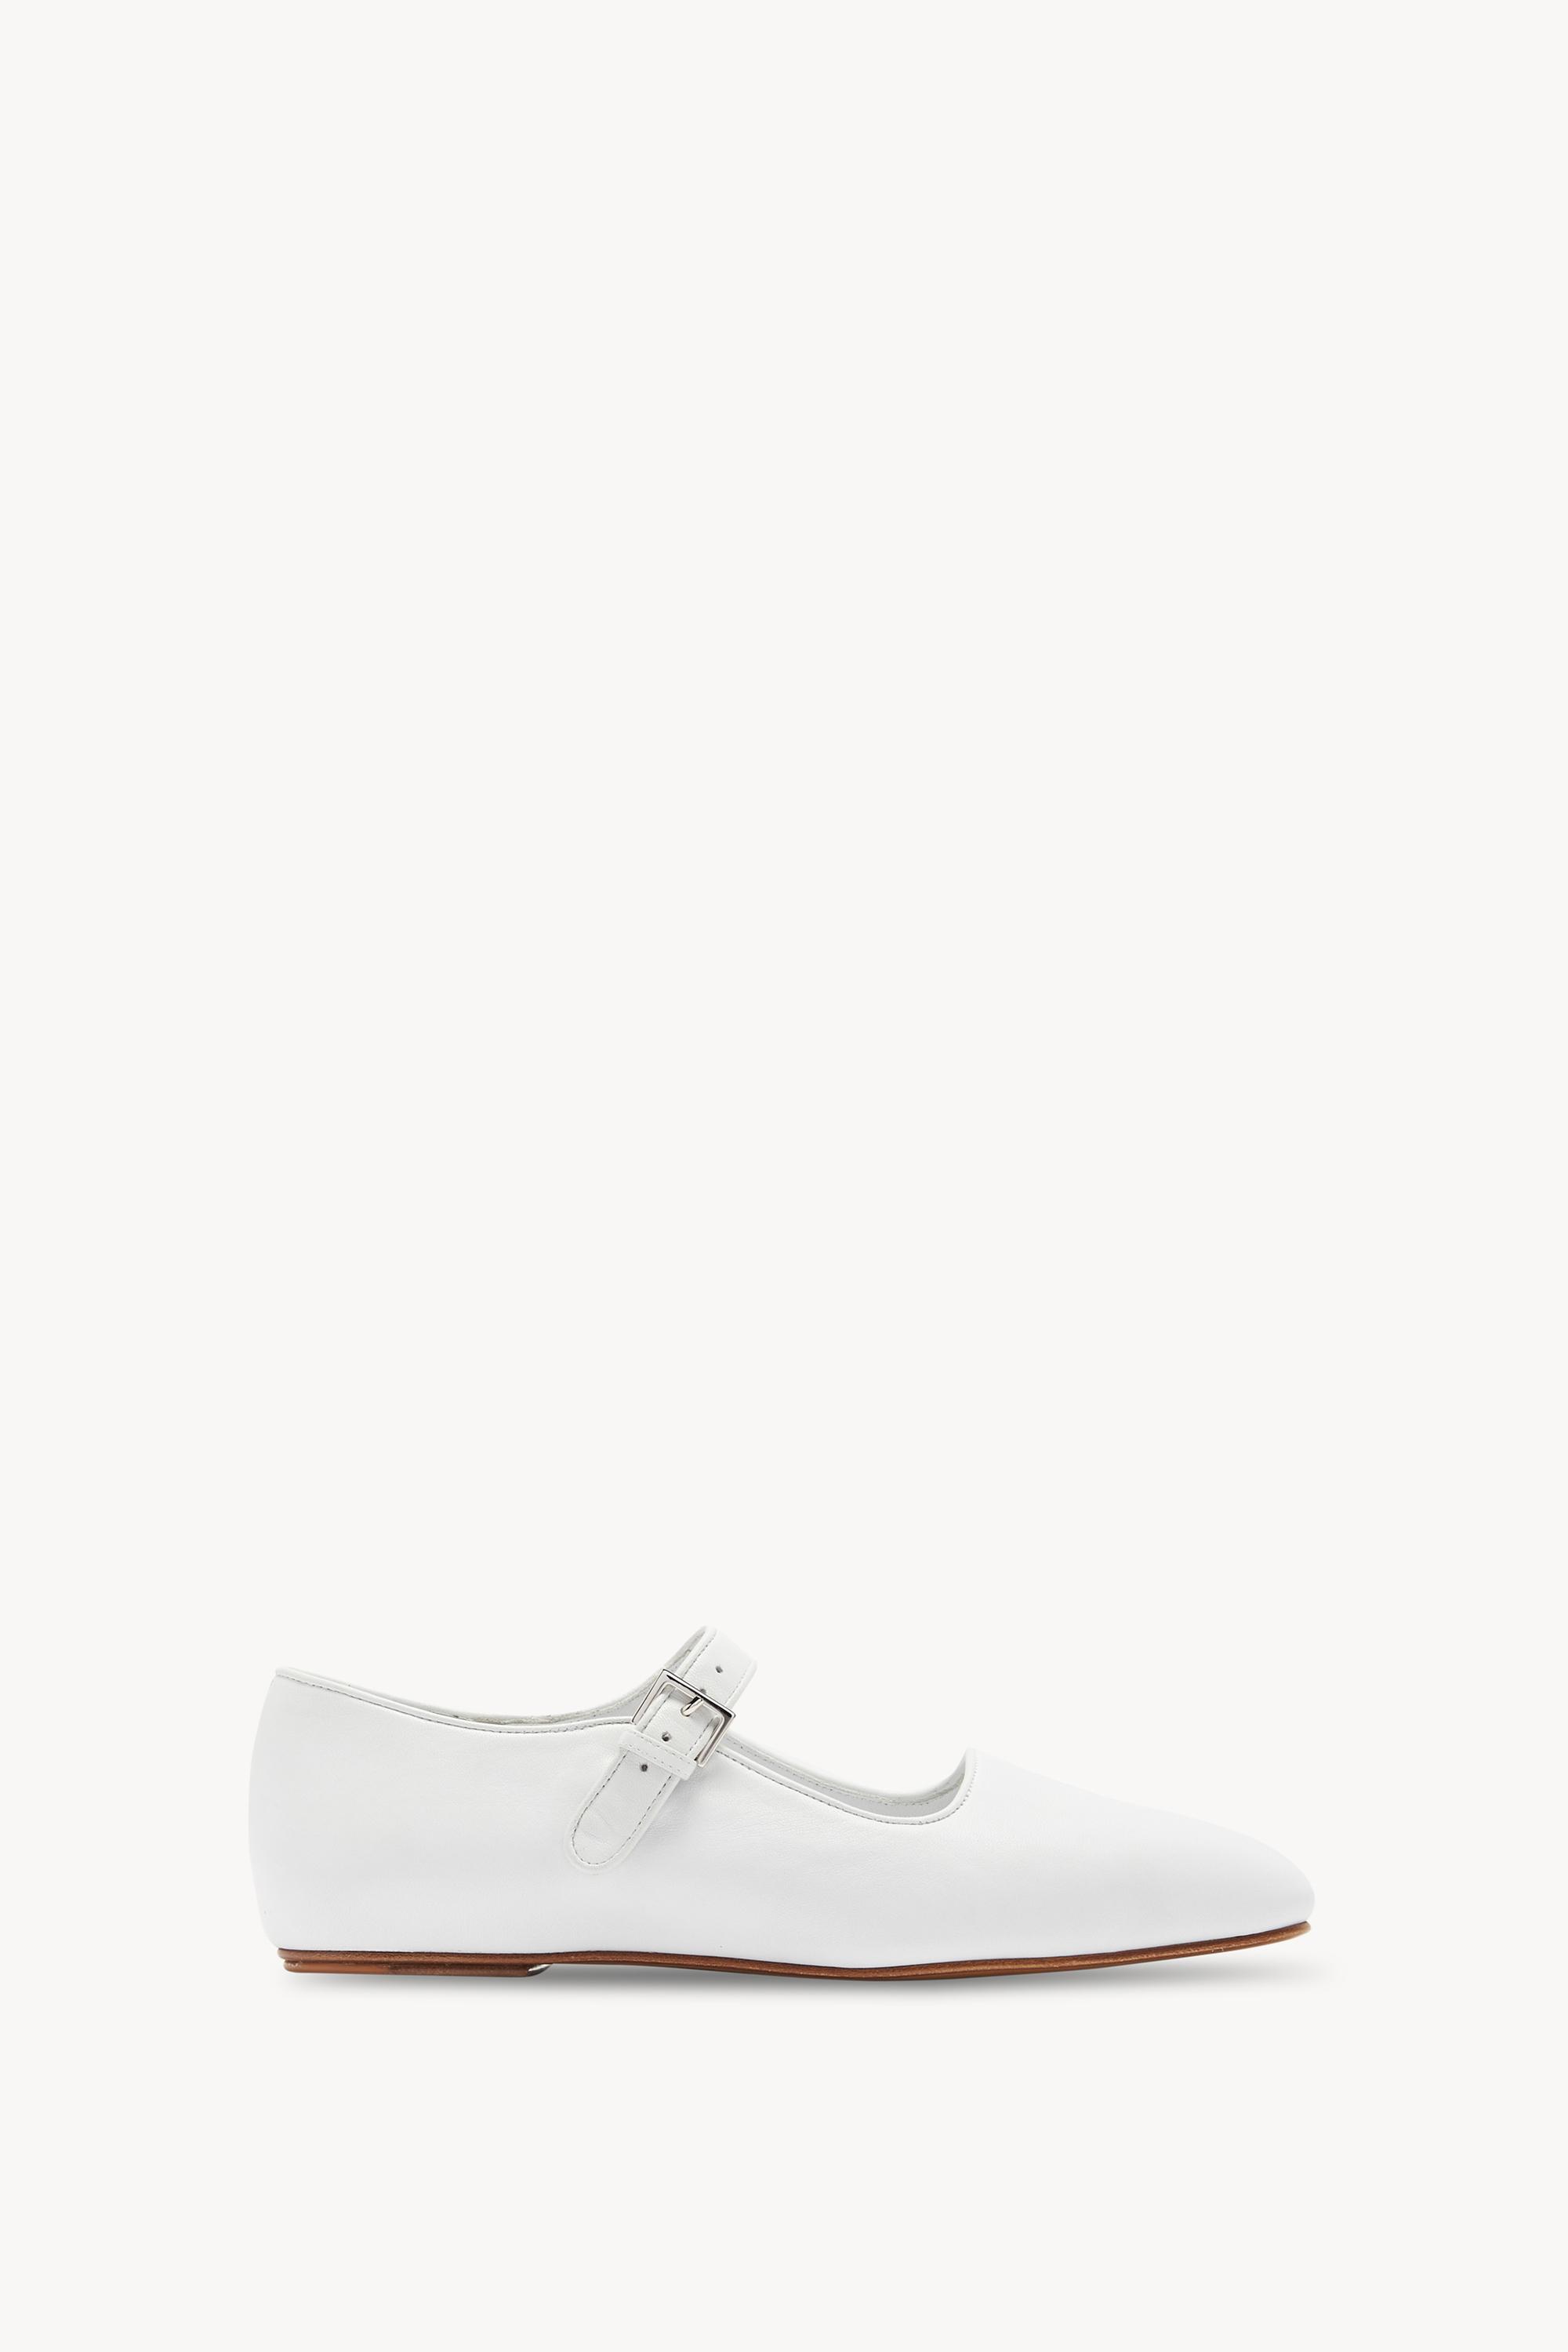 The Row Ava Shoe In Leather in White - Lyst